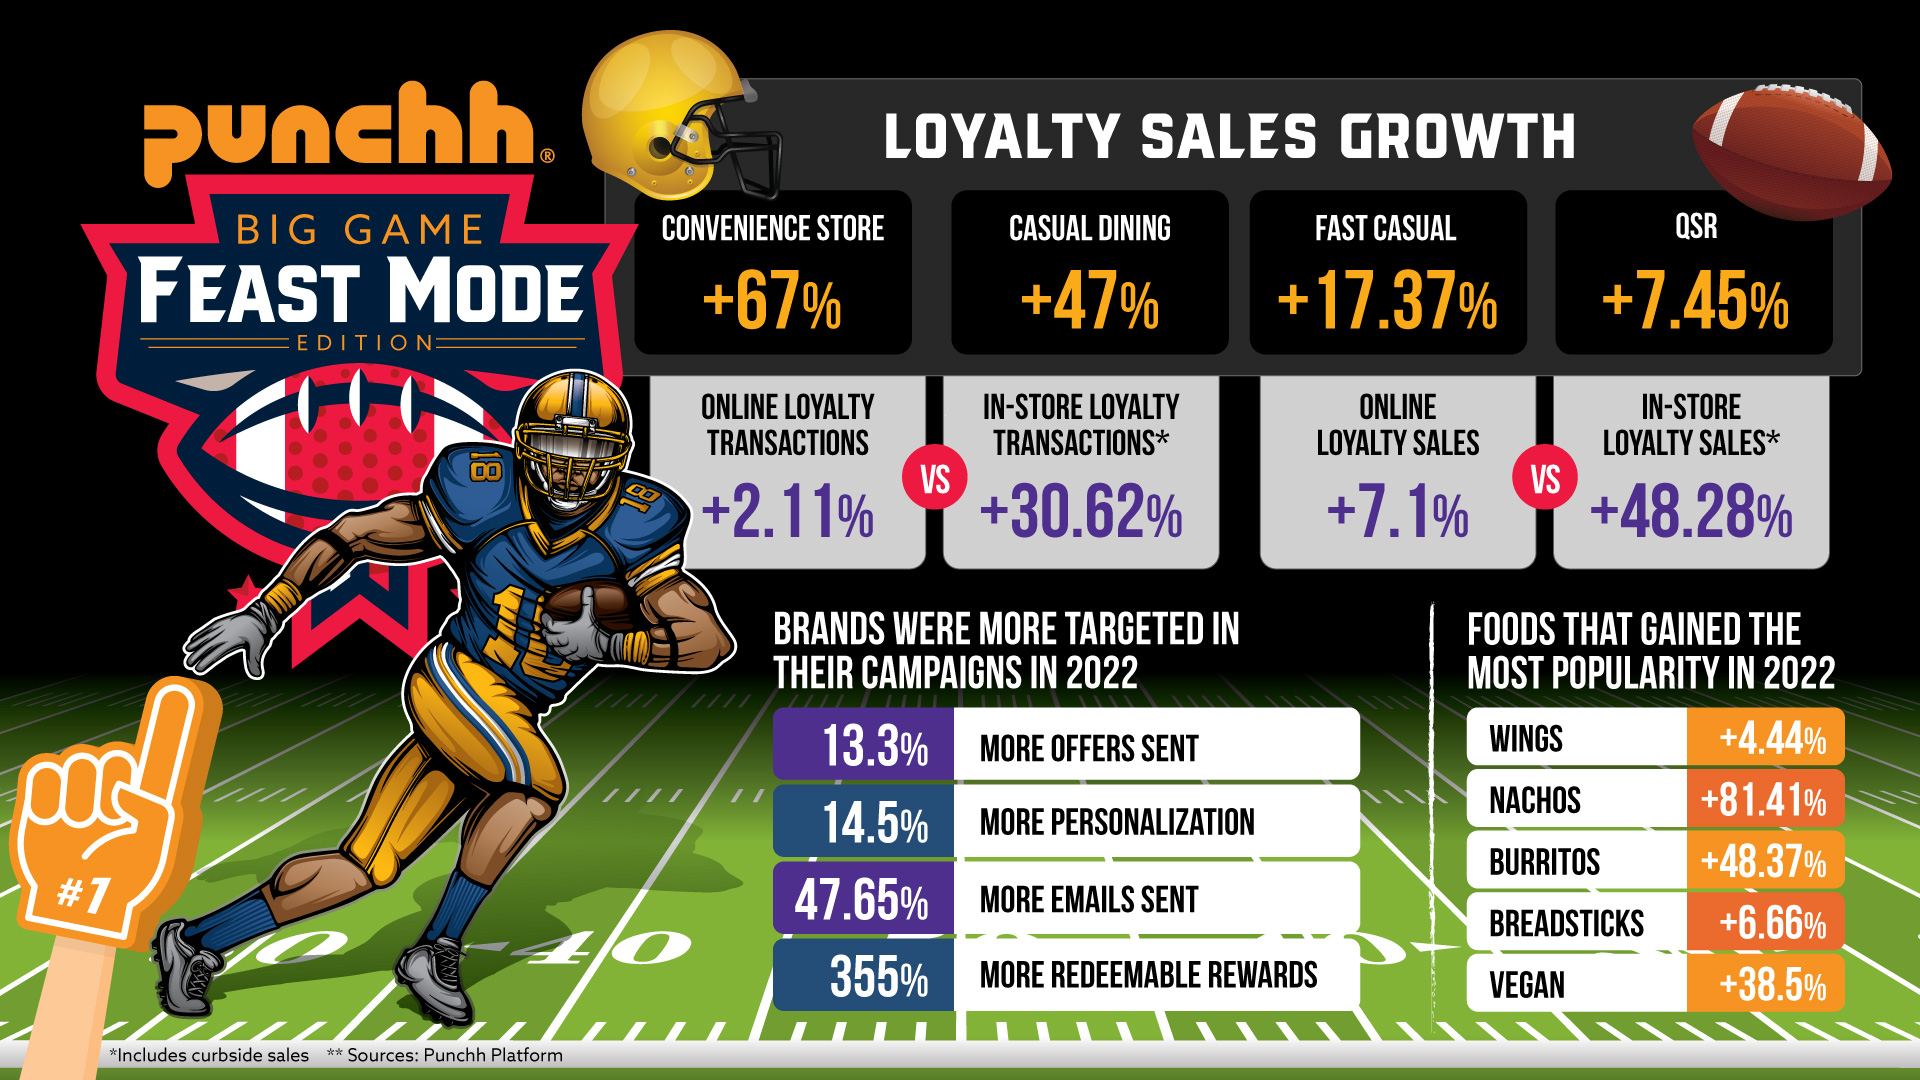 Punchh Big Game Feast Mode - Loyalty Sales Growth